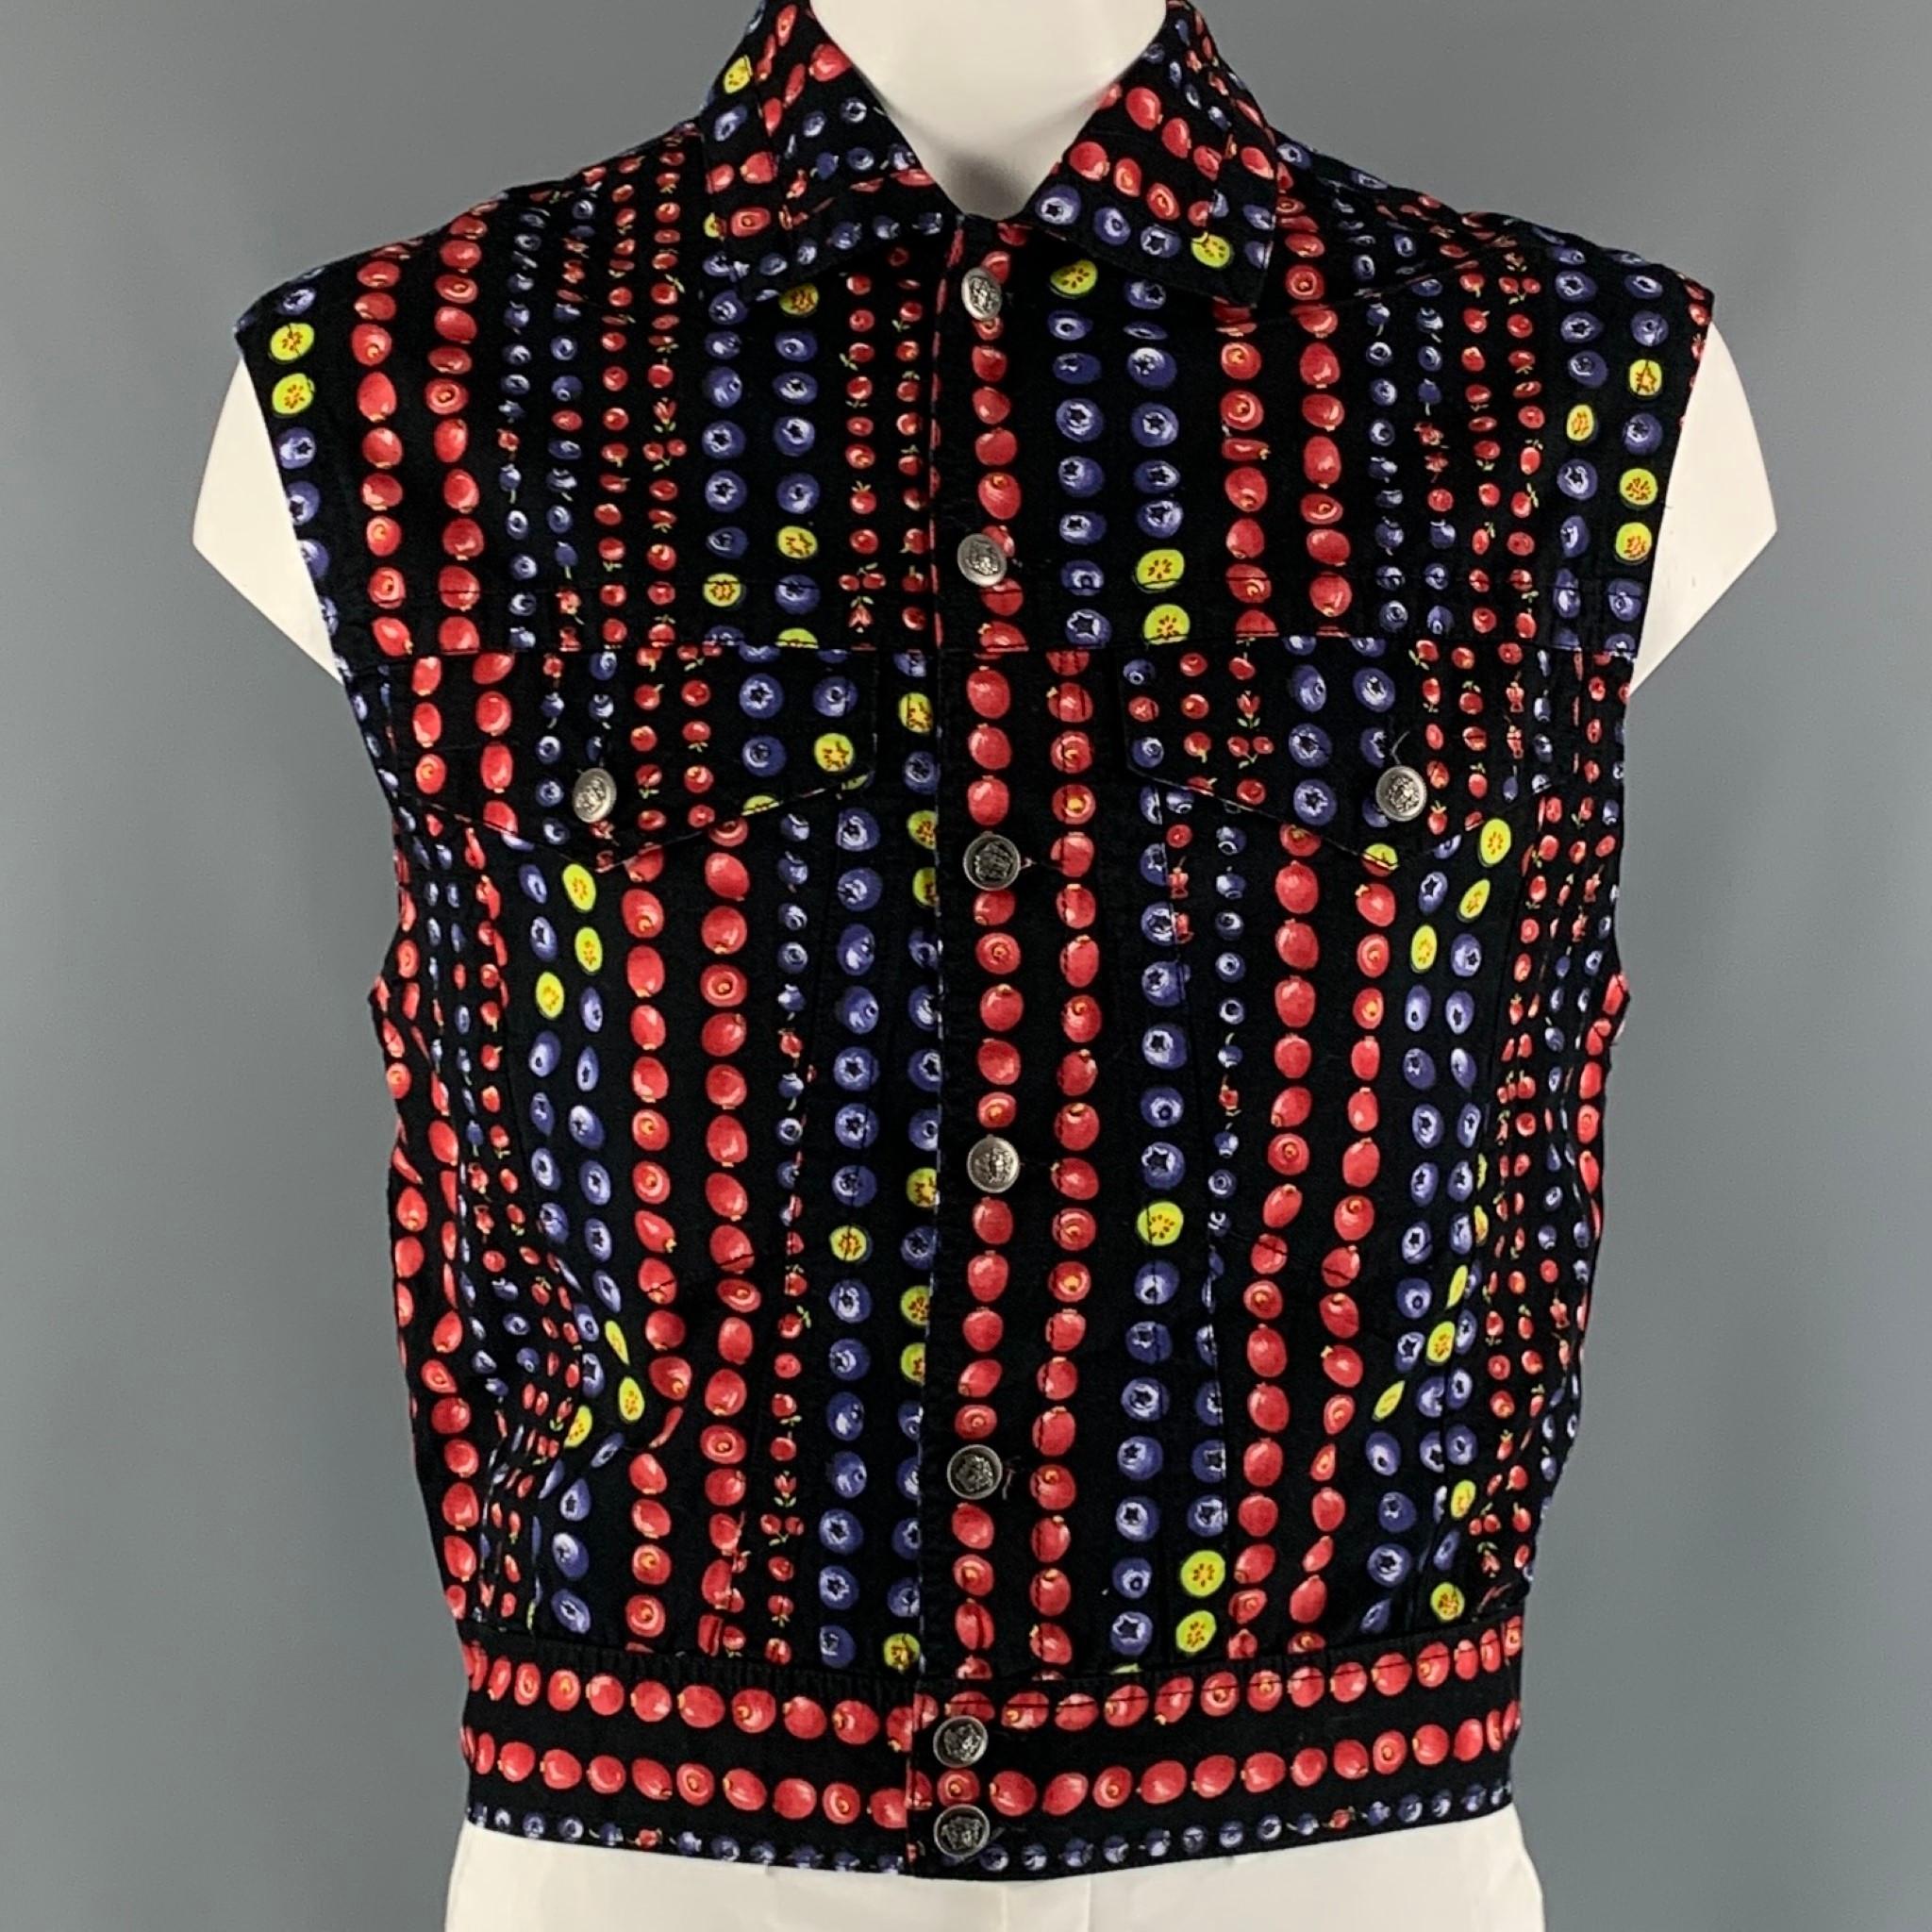 VERSACE JEANS COUTURE vest comes in a black and red fruits printed cotton twill material featuring a trucker style, flap front pockets, and a silver medusa buttons closure. Made In Italy.

Very Good Pre-Owned Condition.
Marked: